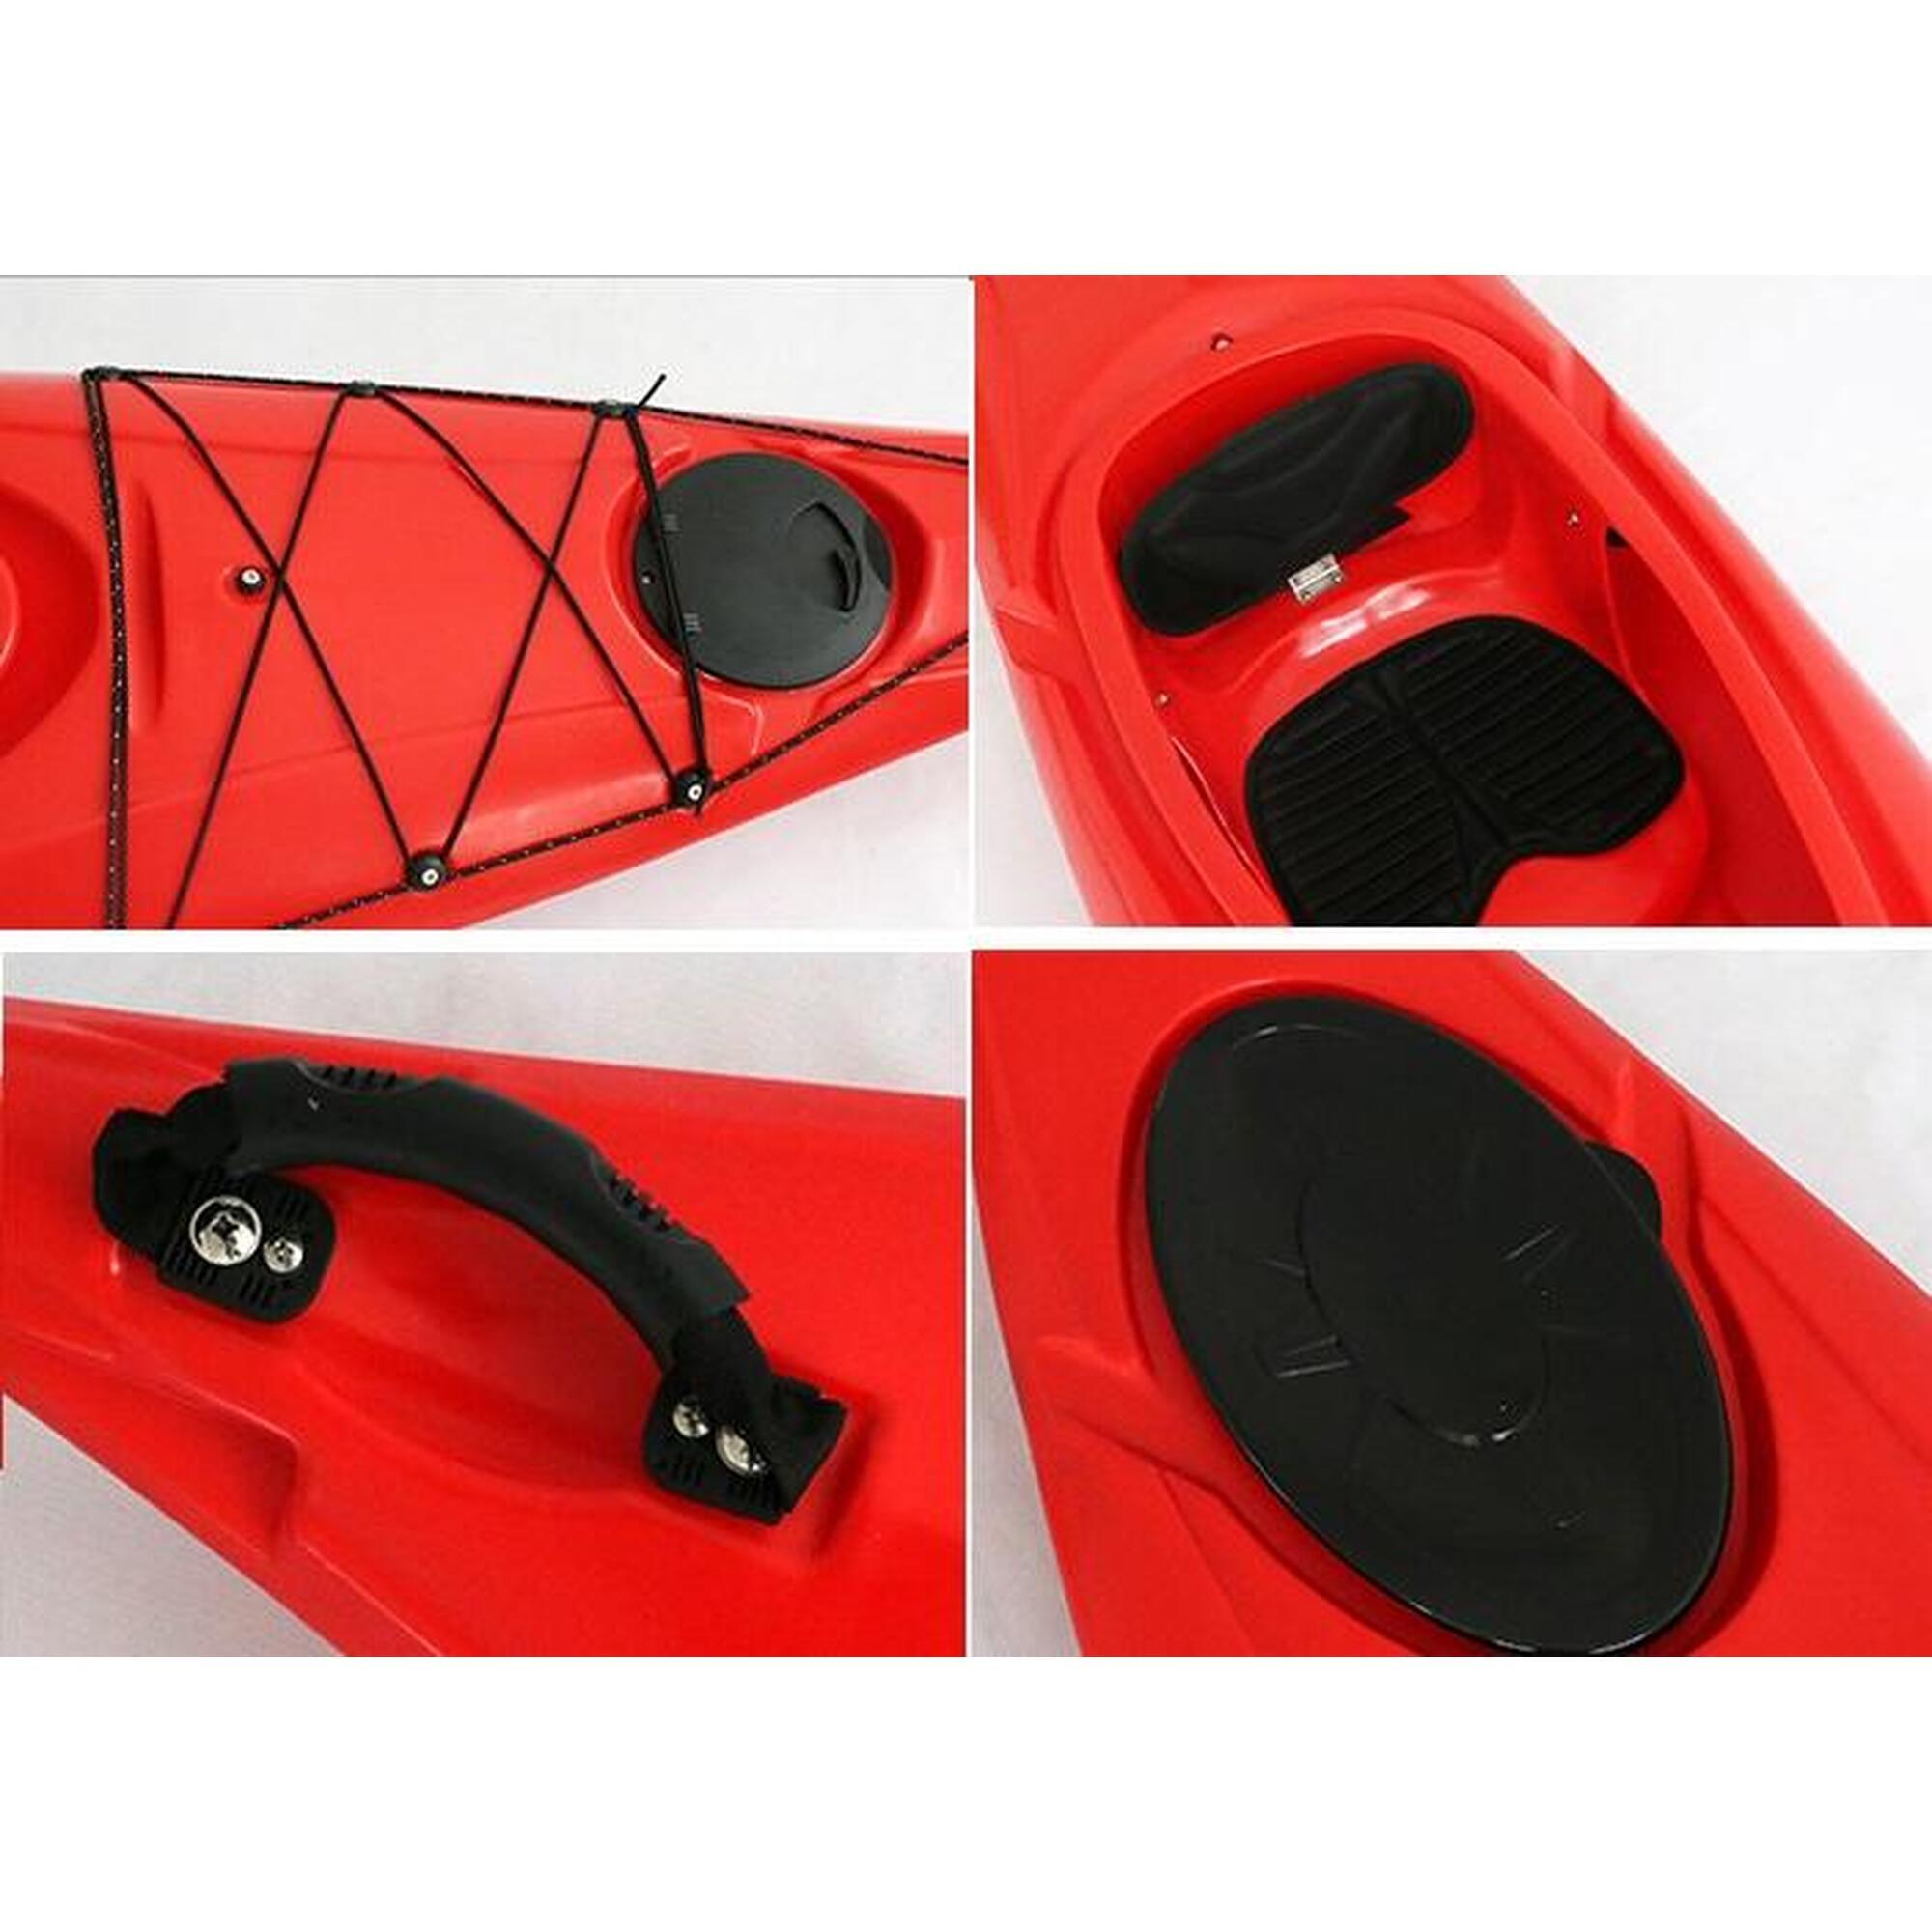 3.6m Sit in solo Rigid Kayak with paddle - Red